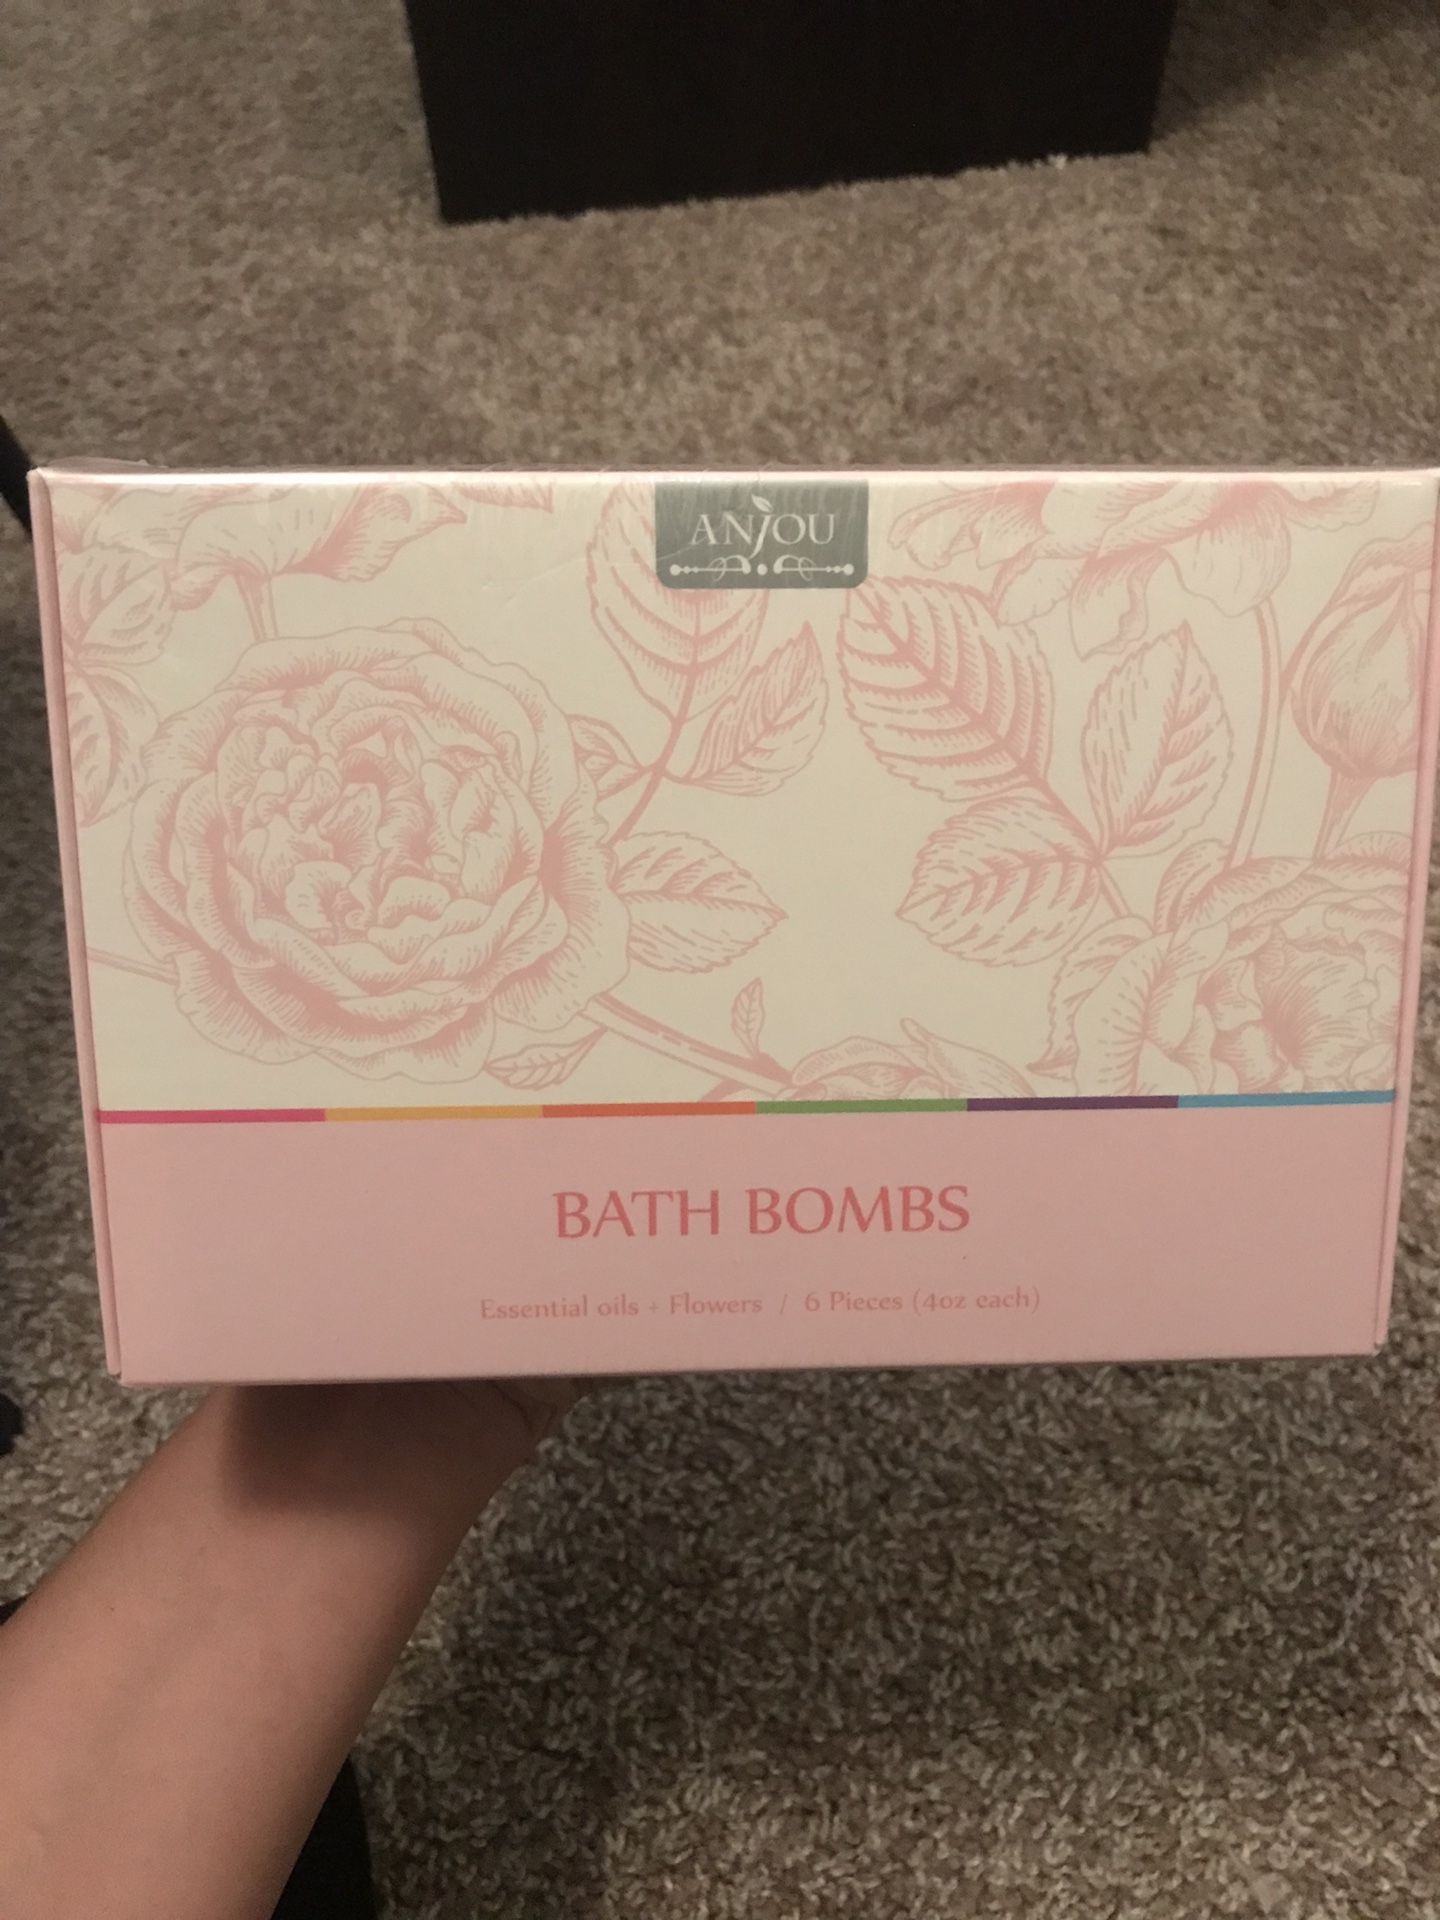 Bath bombs *brand new* sealed in package